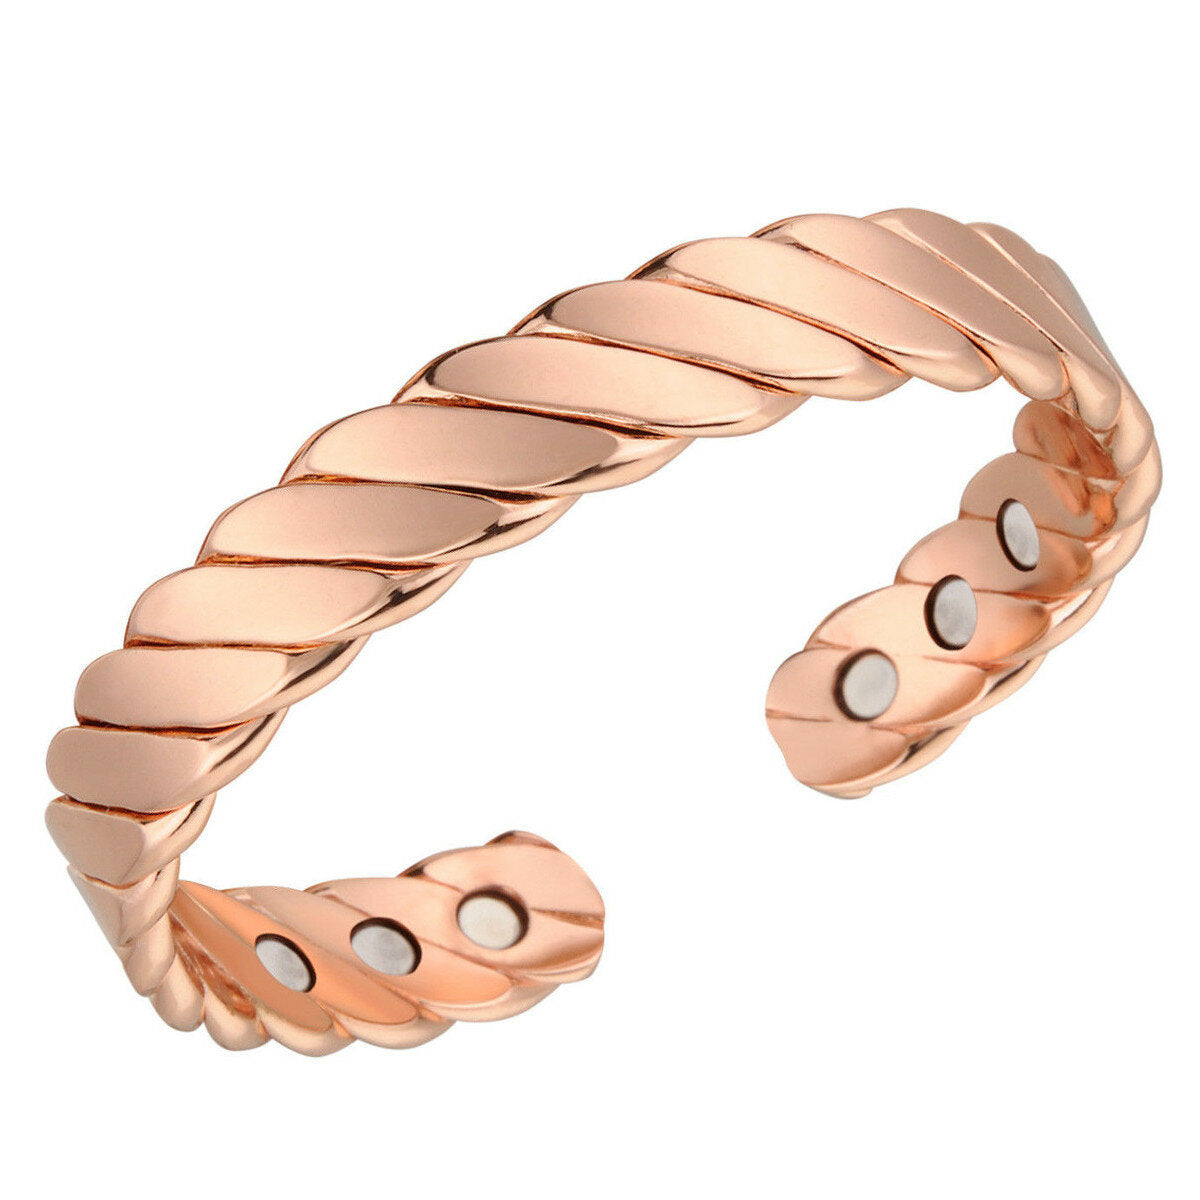 Fashion Rose Gold Magnetic Bracelet Neodymium Magnet Therapy Pain Relief Health Care Copper Bangle